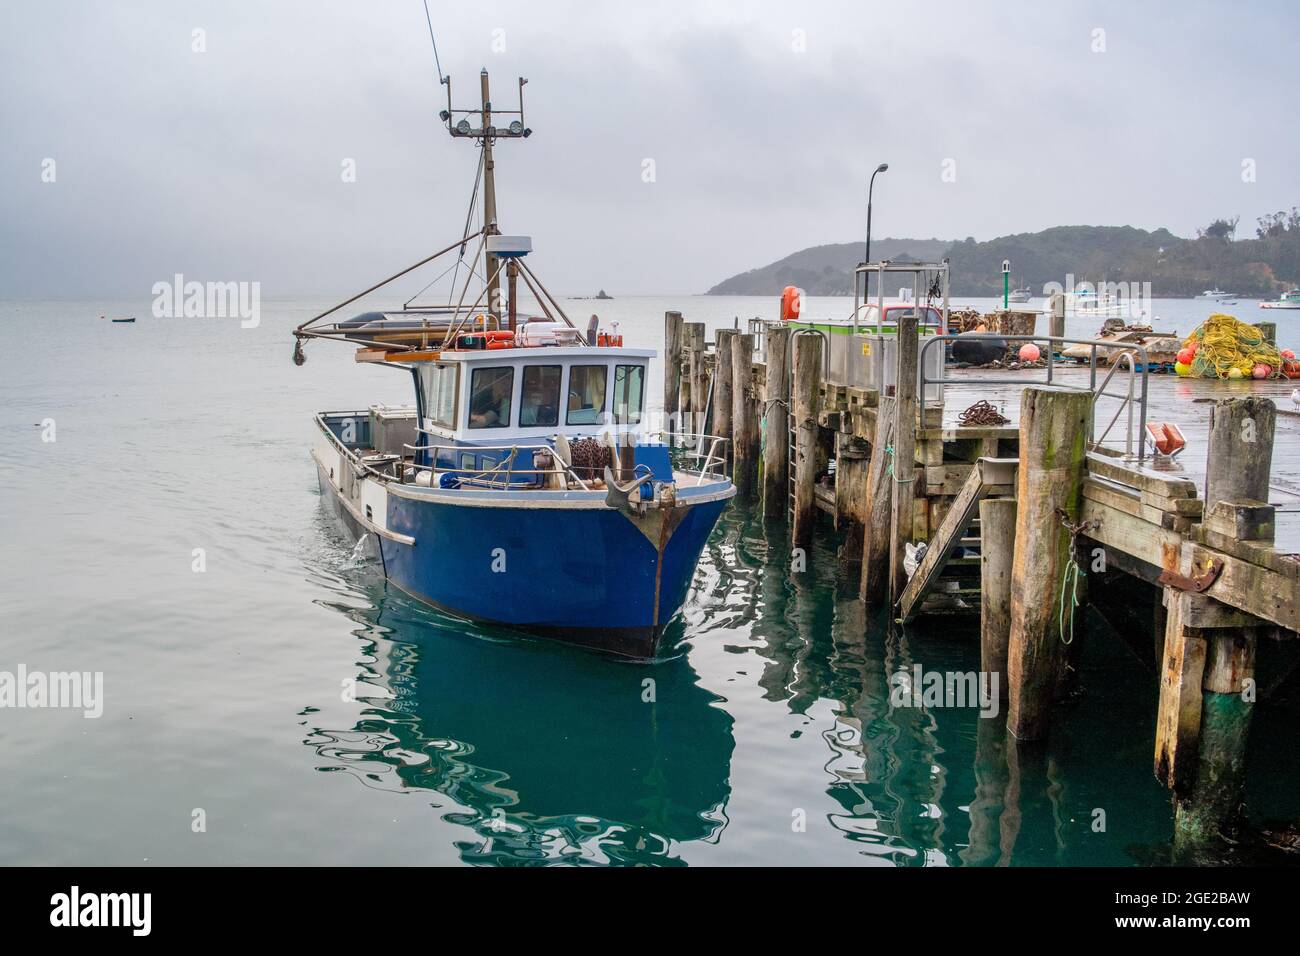 A fishing boat docked at the wharf, floats on the still sea, waiting for the next trip out on the ocean Stock Photo